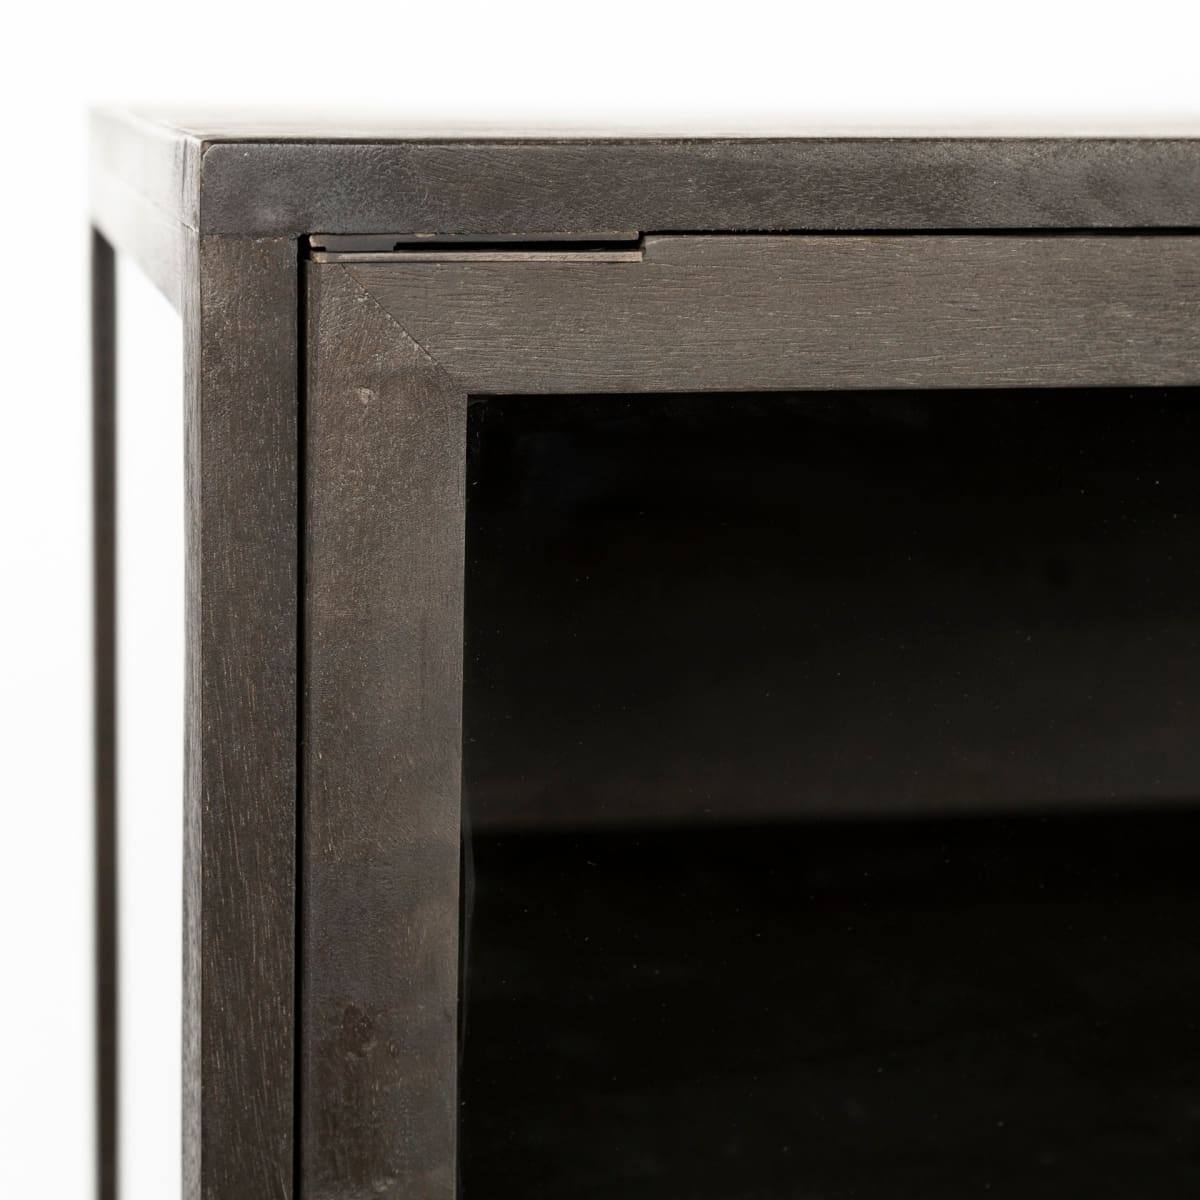 Arelius Accent Cabinet Black-Brown Wood | Black Metal - acc-chest-cabinets